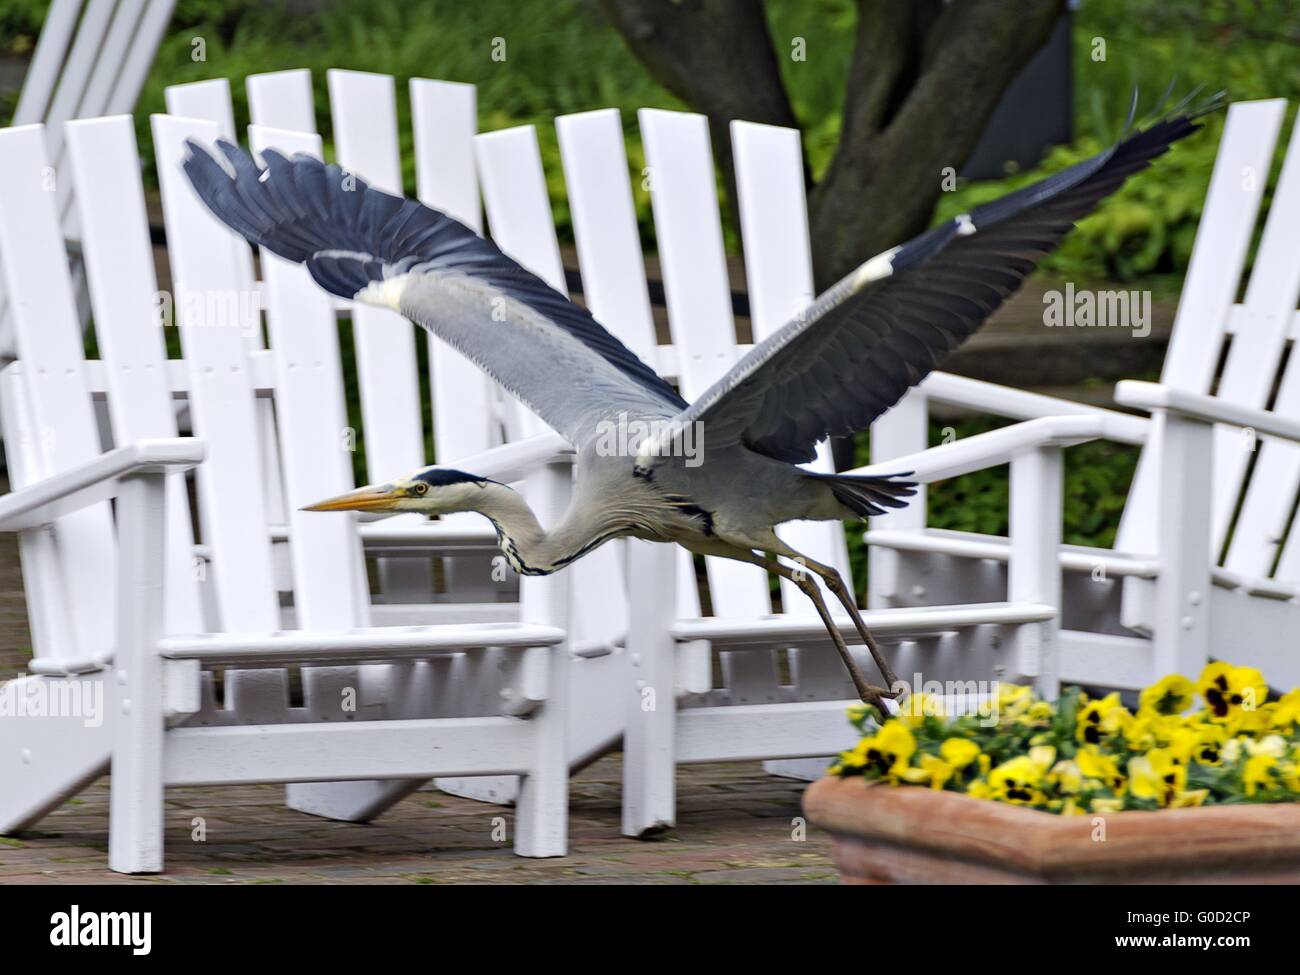 heron flying in front of white garden chairs Stock Photo